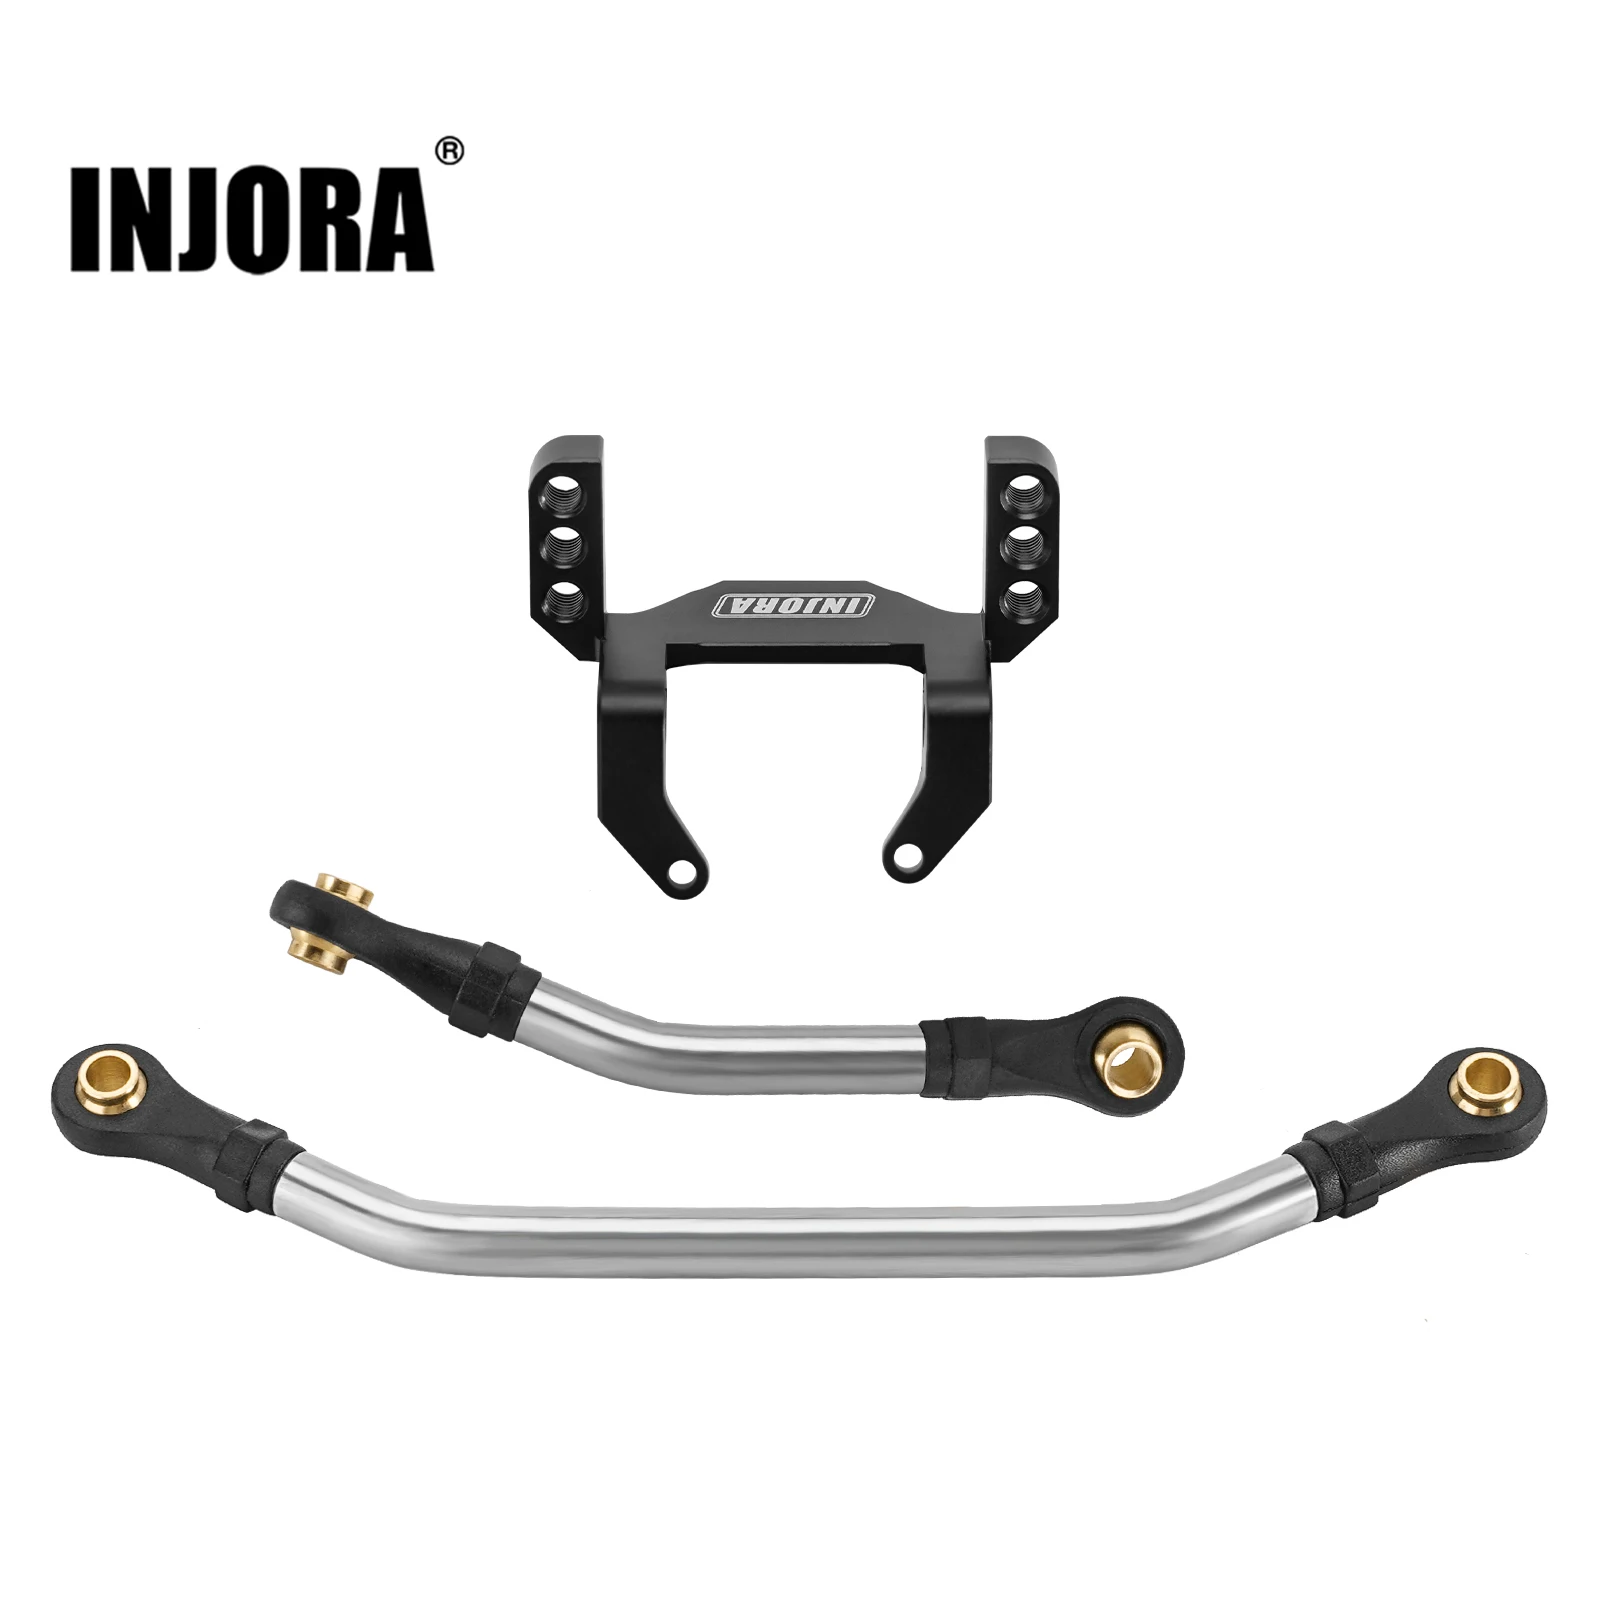 INJORA-Aluminum-Lay-Down-Servo-Mount-with-Stainless-Steel-Steering-Links-Set-for-1-18-RC.webp